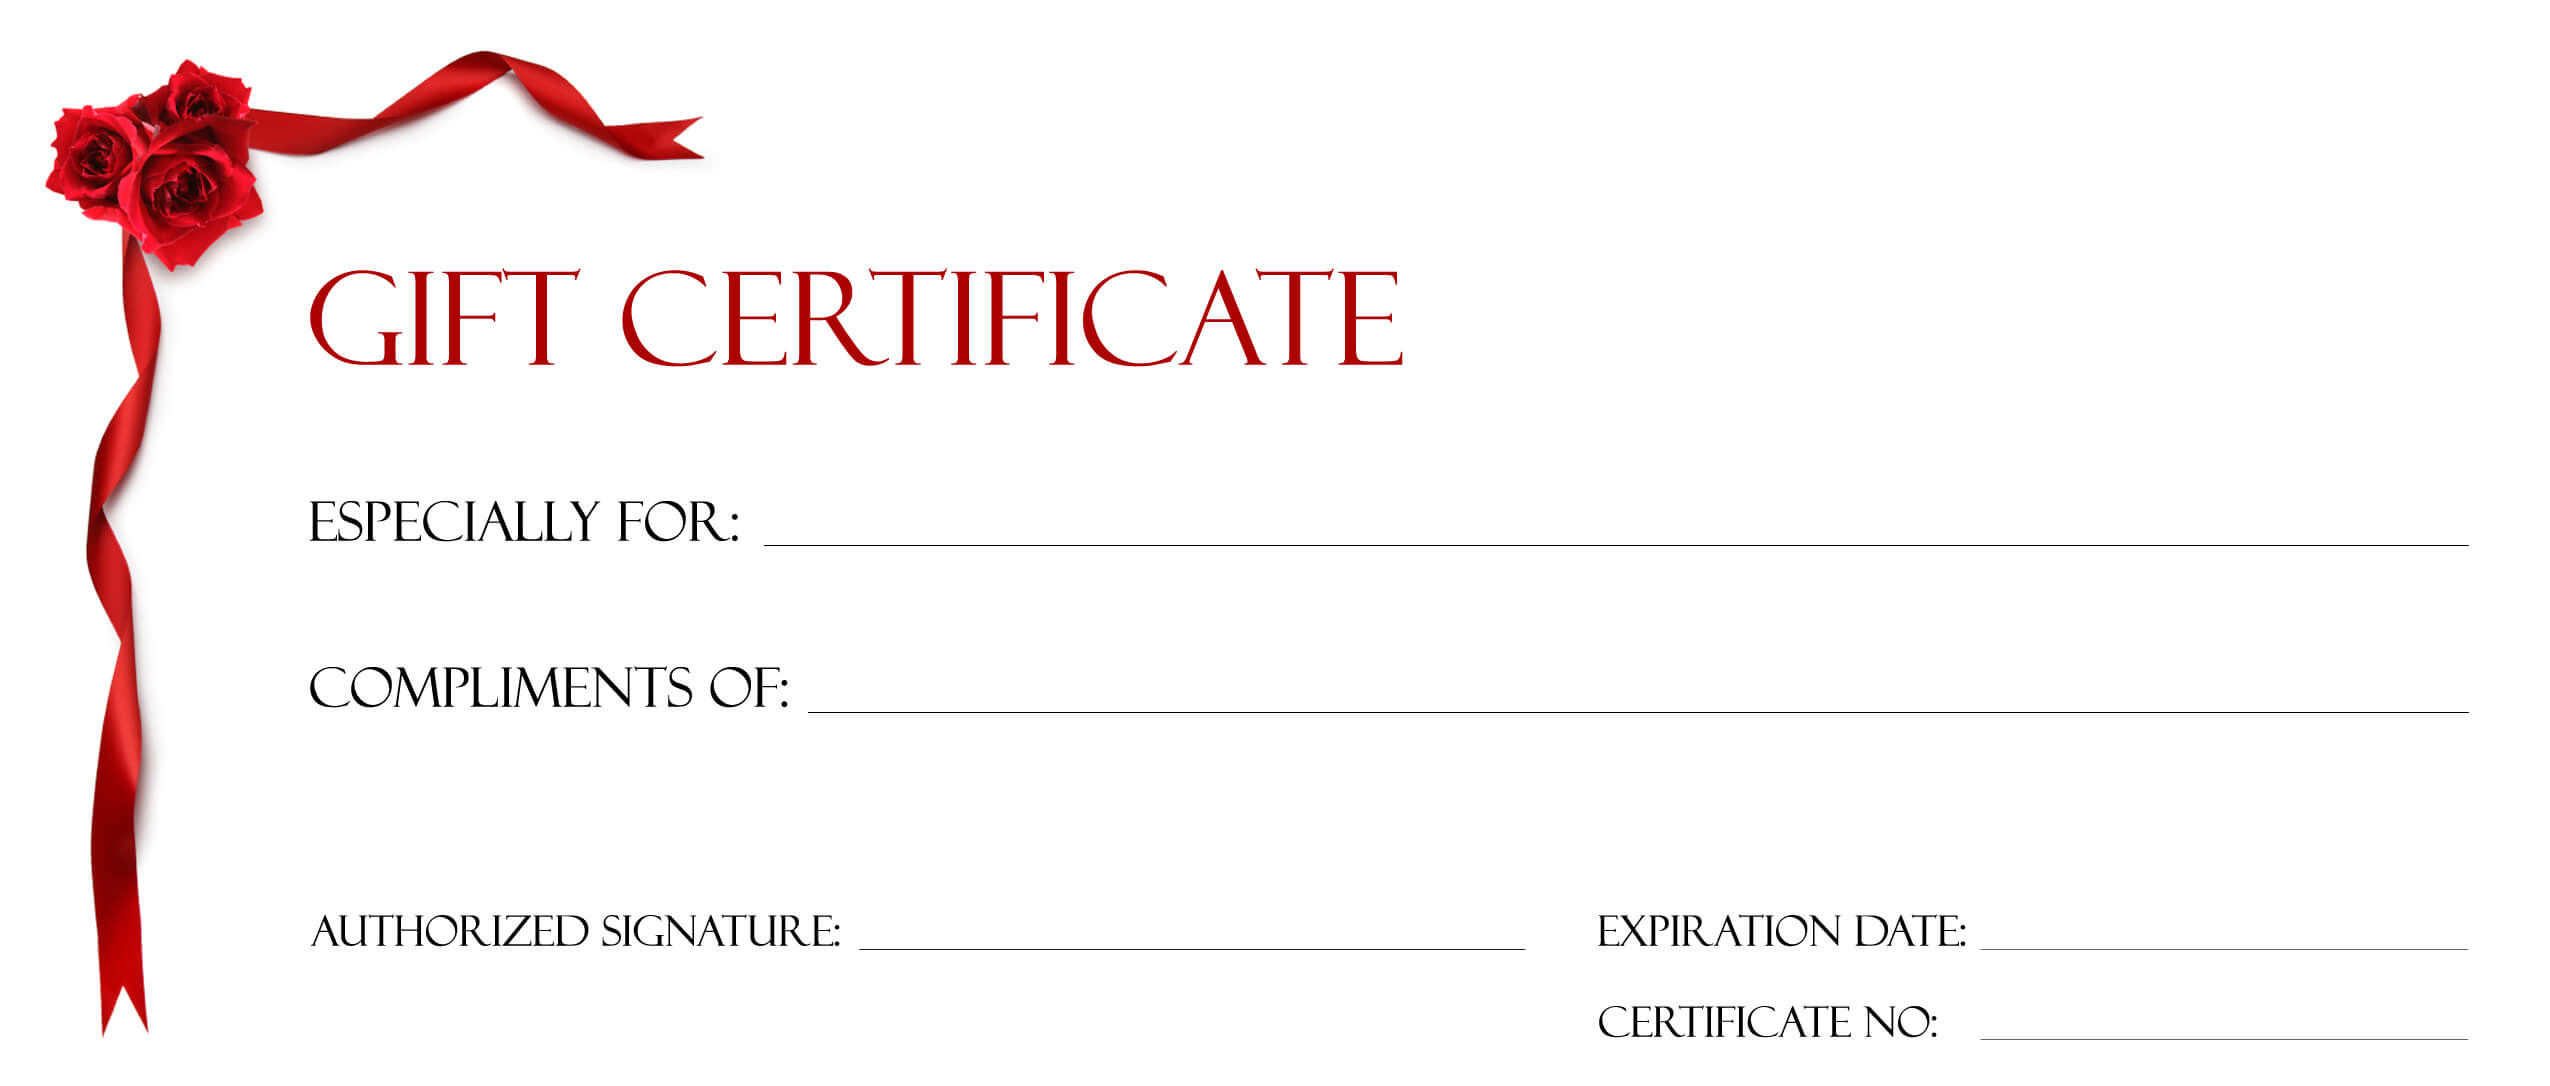 Gift Certificate Template Microsoft Publisher With Regard To Publisher Gift Certificate Template